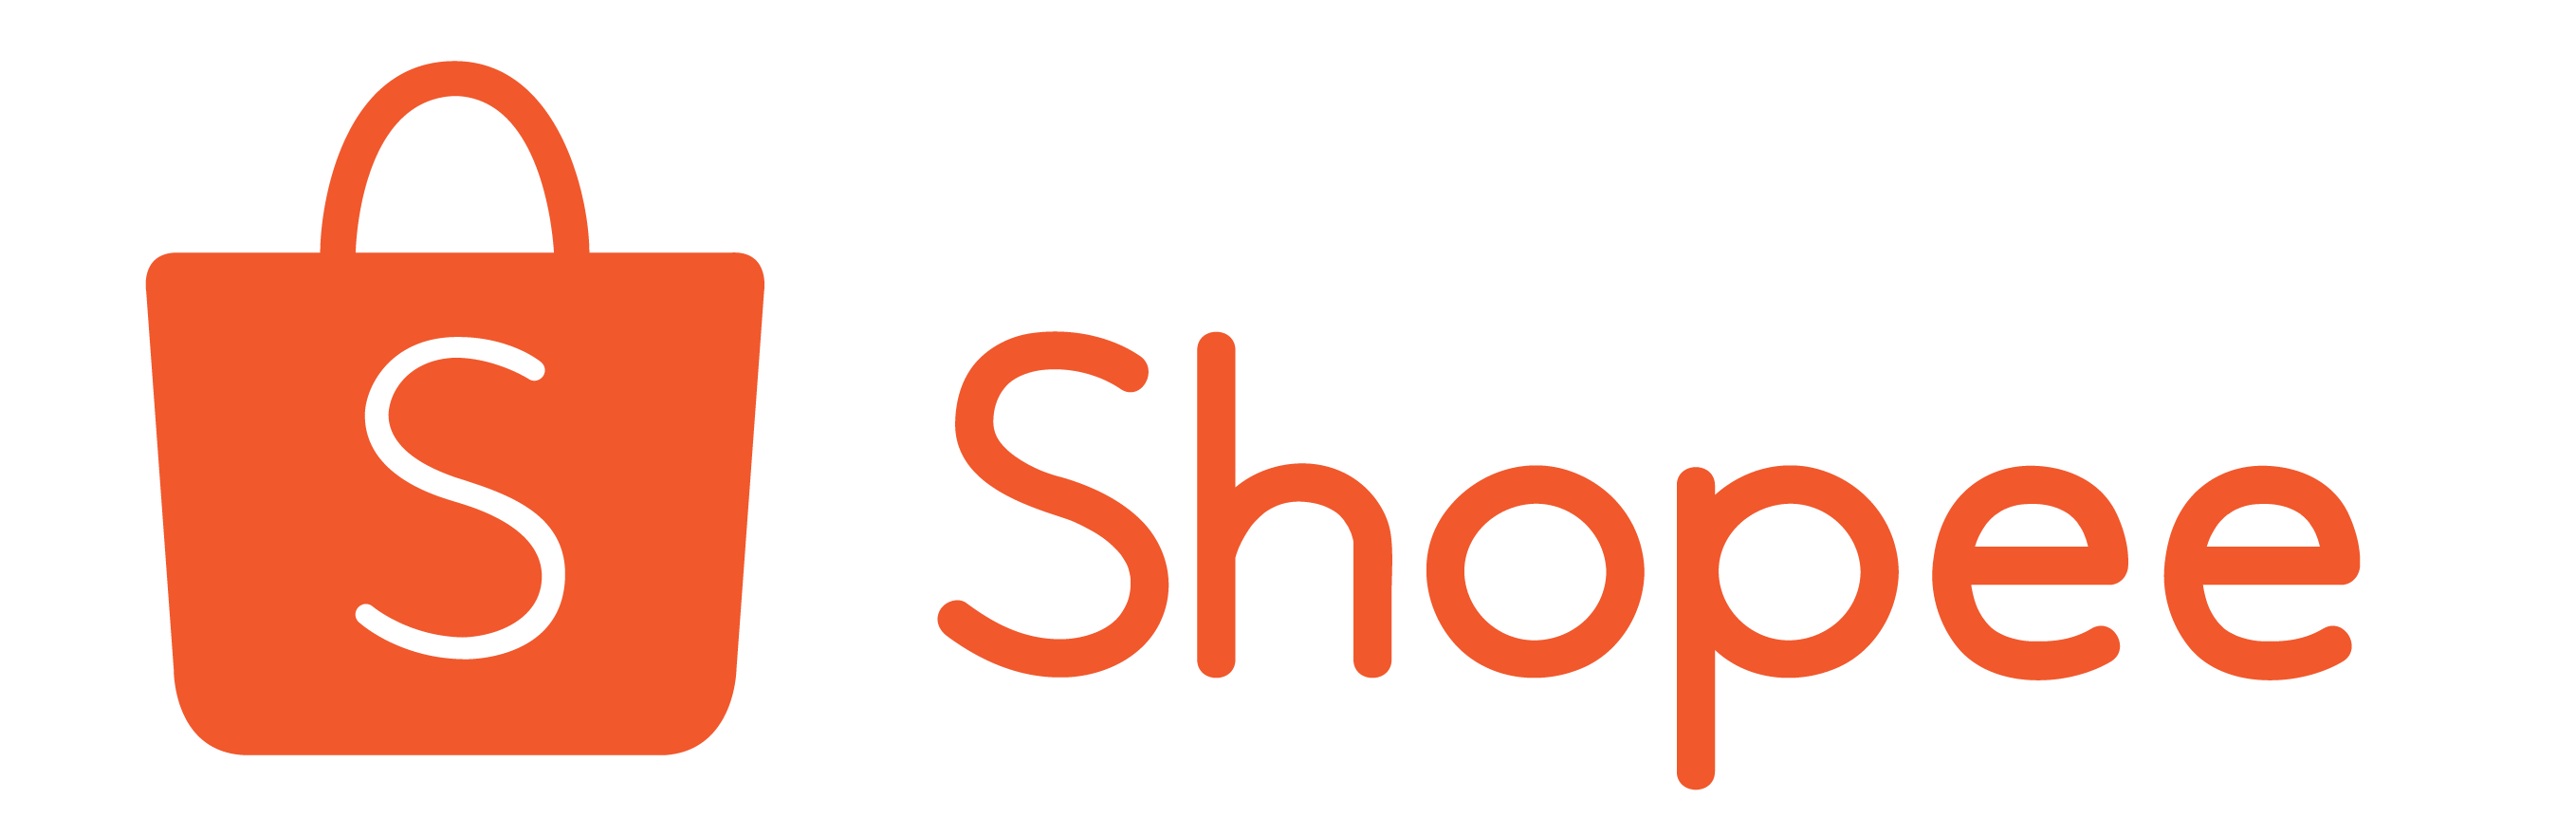 Shopee Logo PNG Images, Free Download Shopee Icon - Free ...